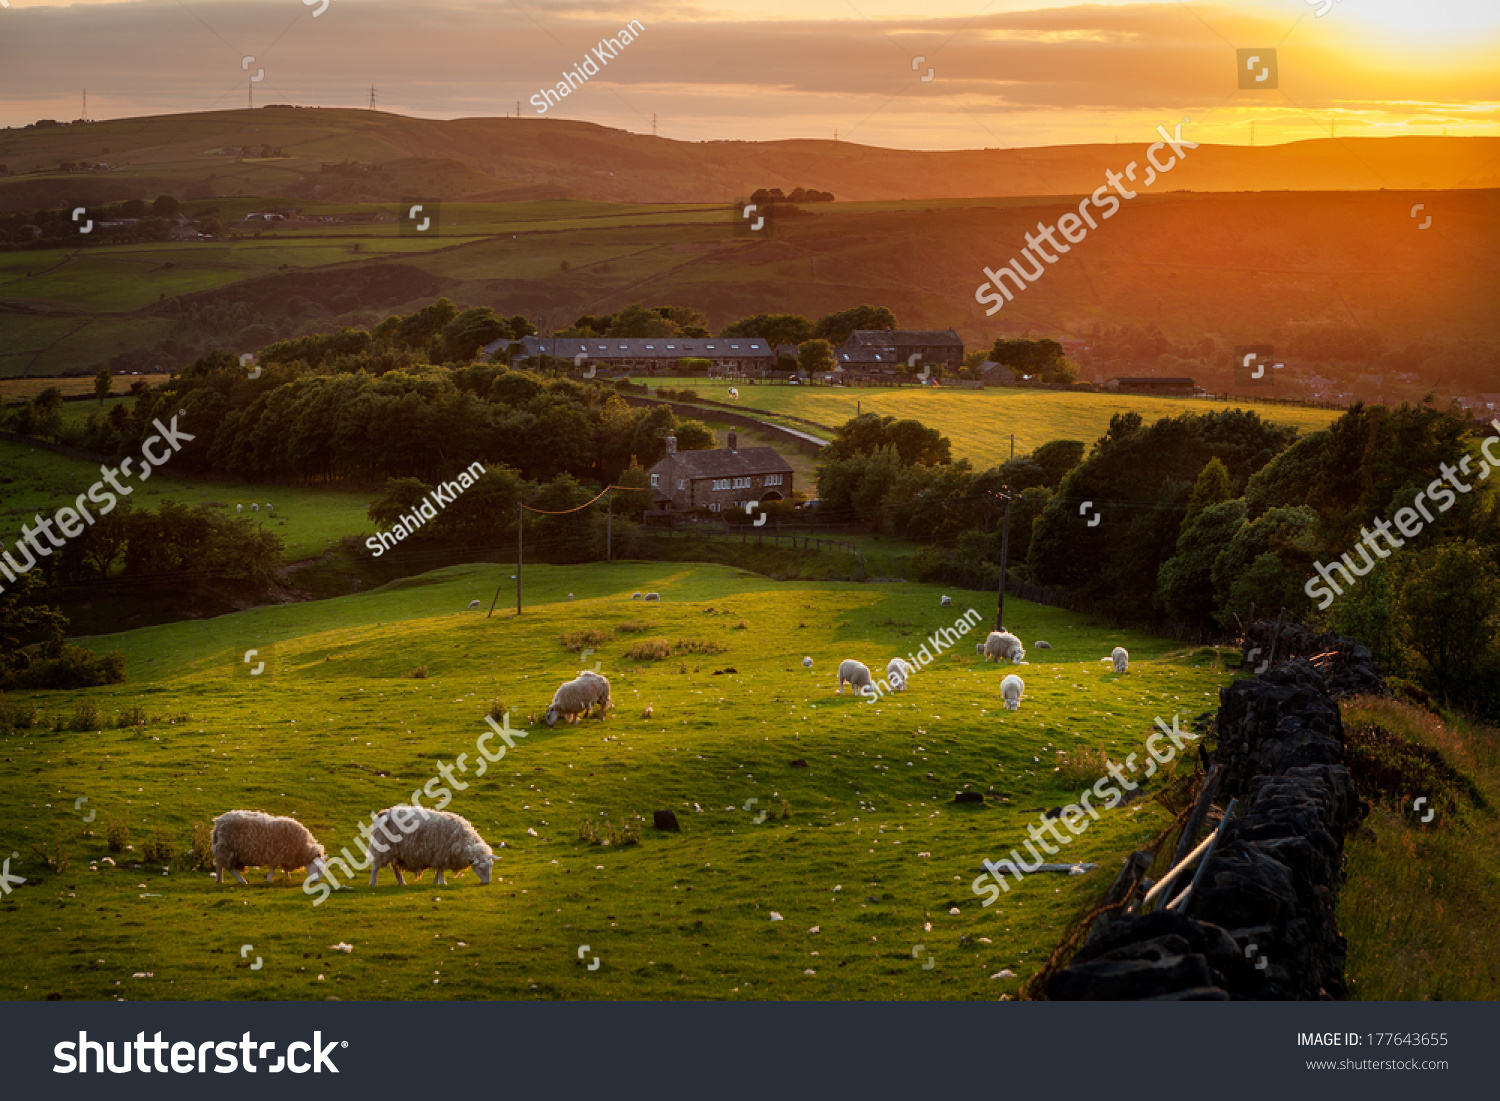 Sheep grazing in a beautiful landscape in the British countryside near the outskirts of Manchester. #177643655